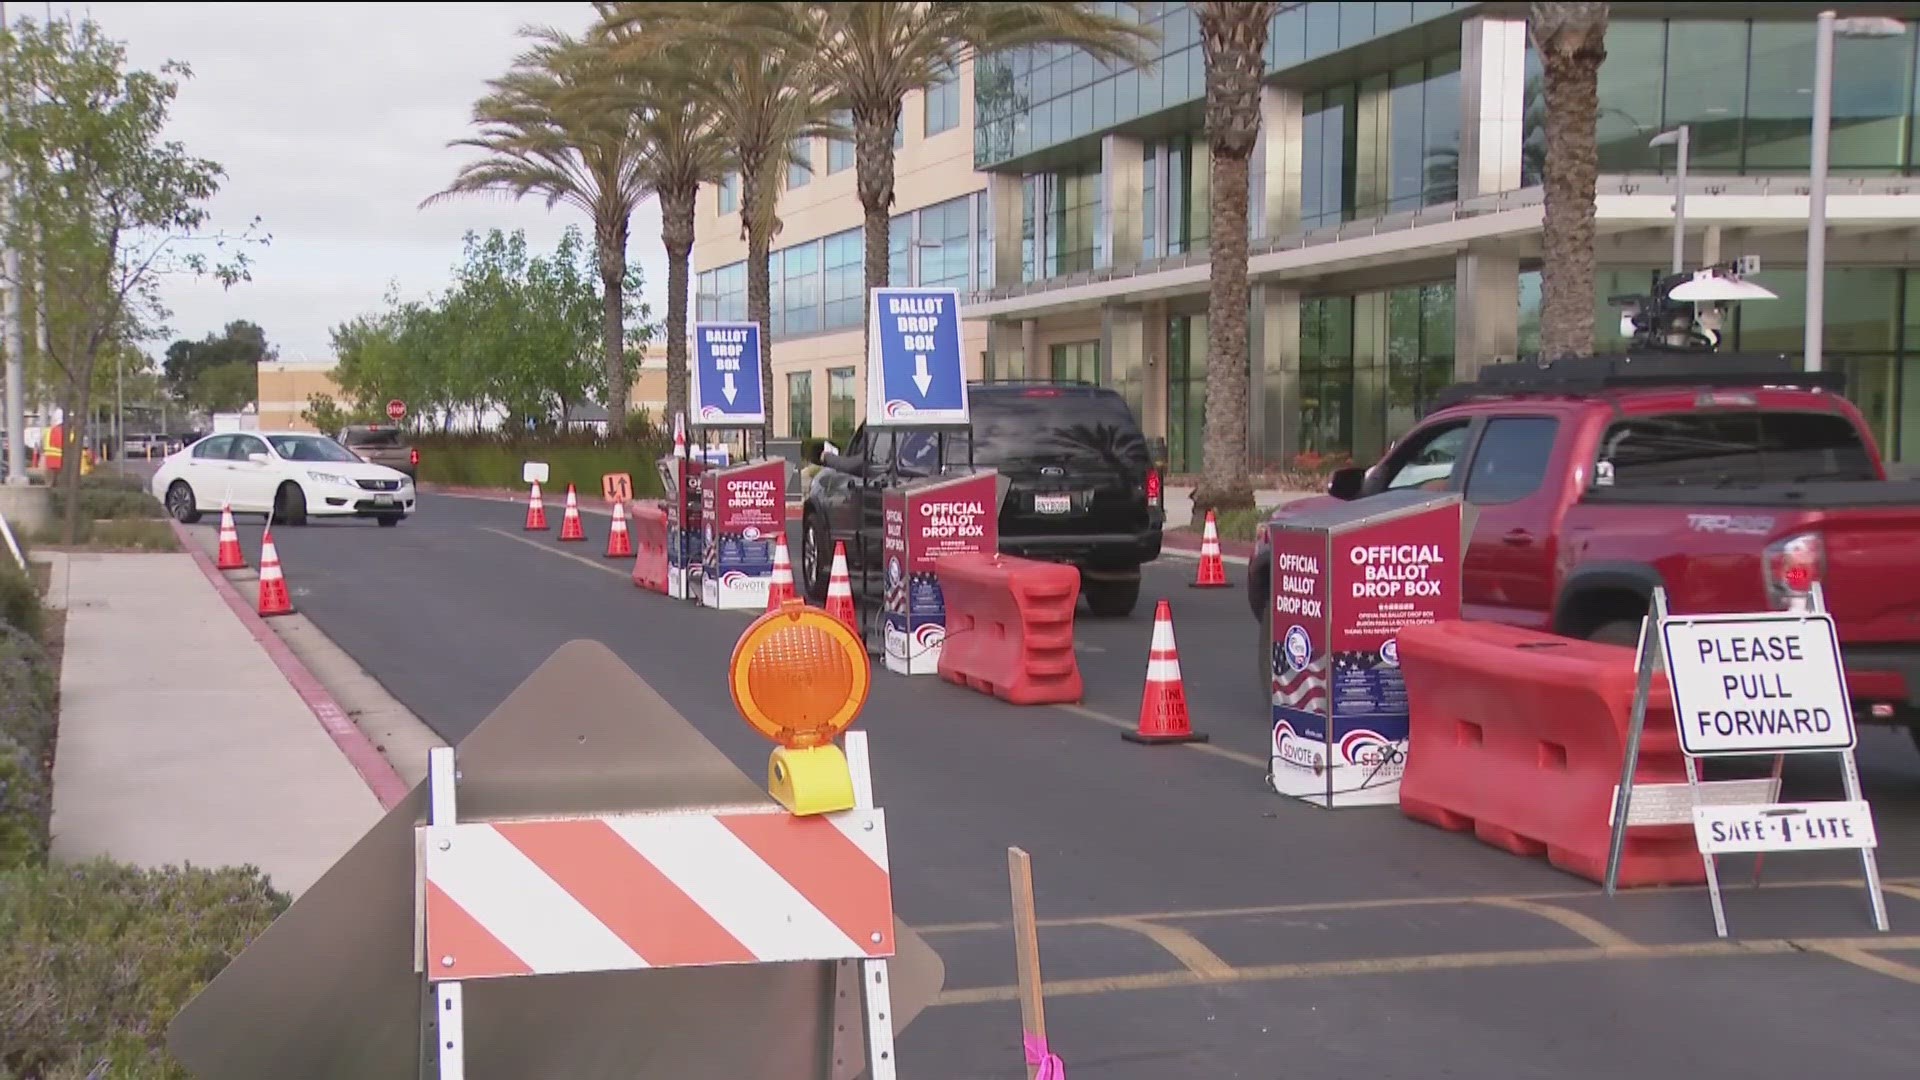 Voters will be able to cast their ballots for the March 5 Presidential Primary Election at any one of more than 200 vote centers across San Diego County until 8:00pm